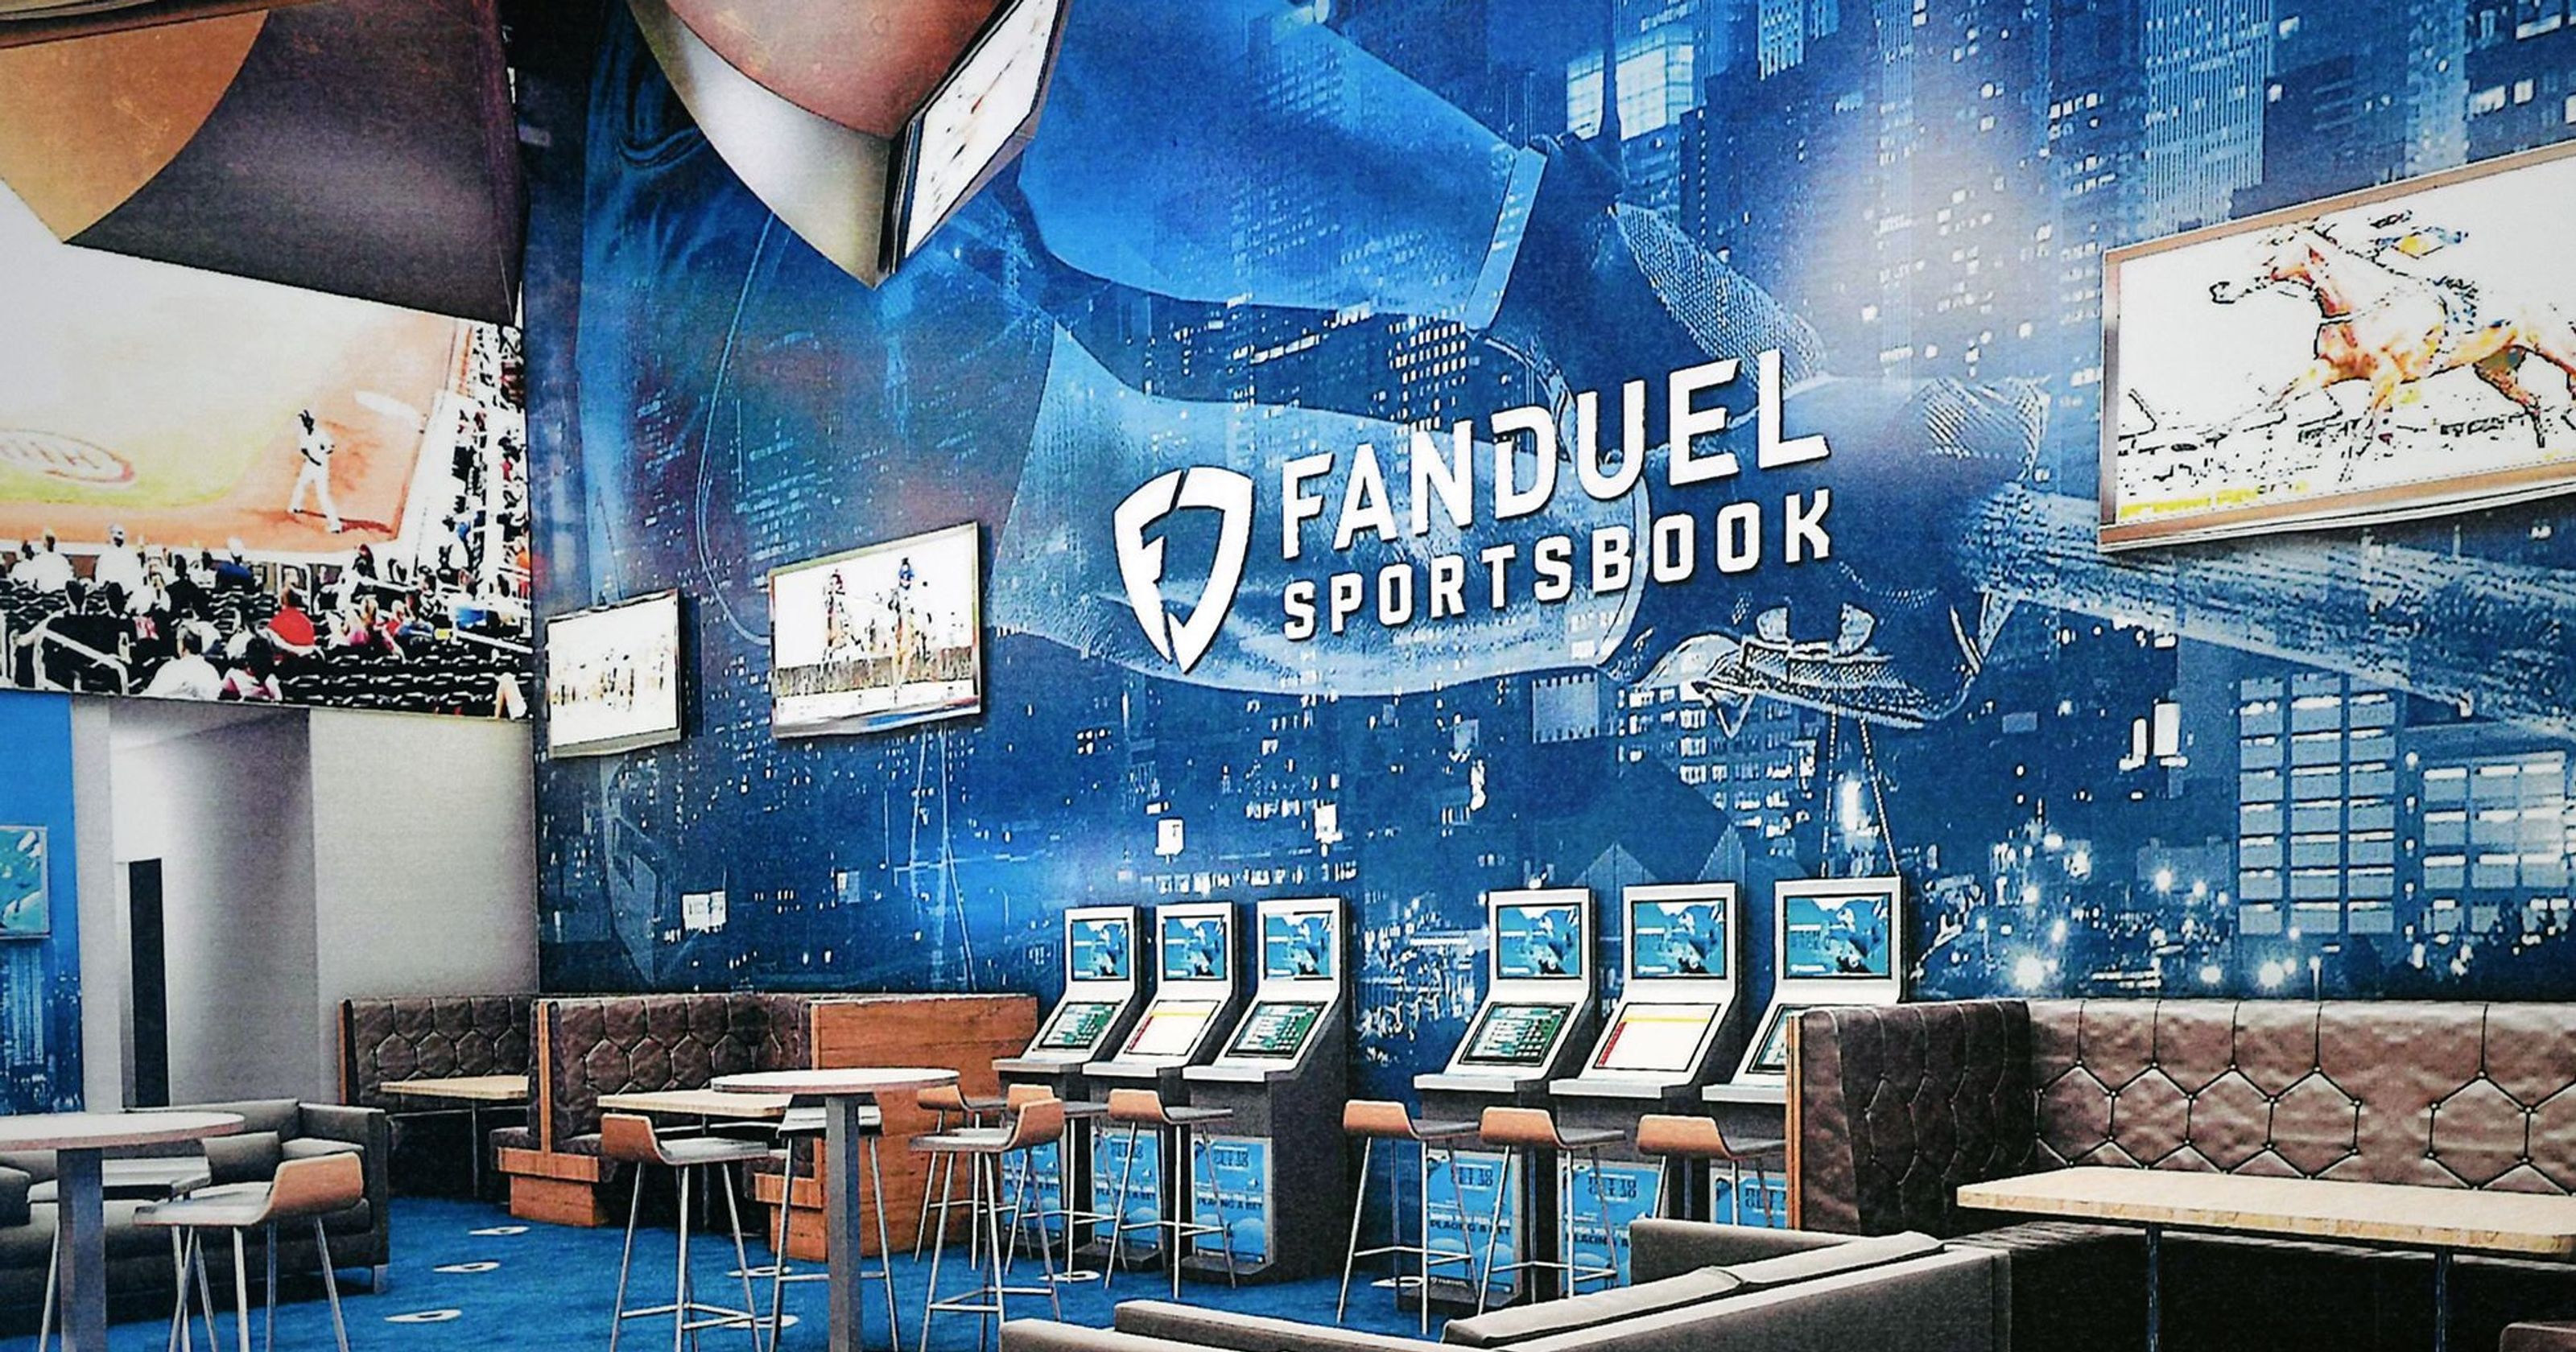 FanDuel agrees deal with Boyd Gaming